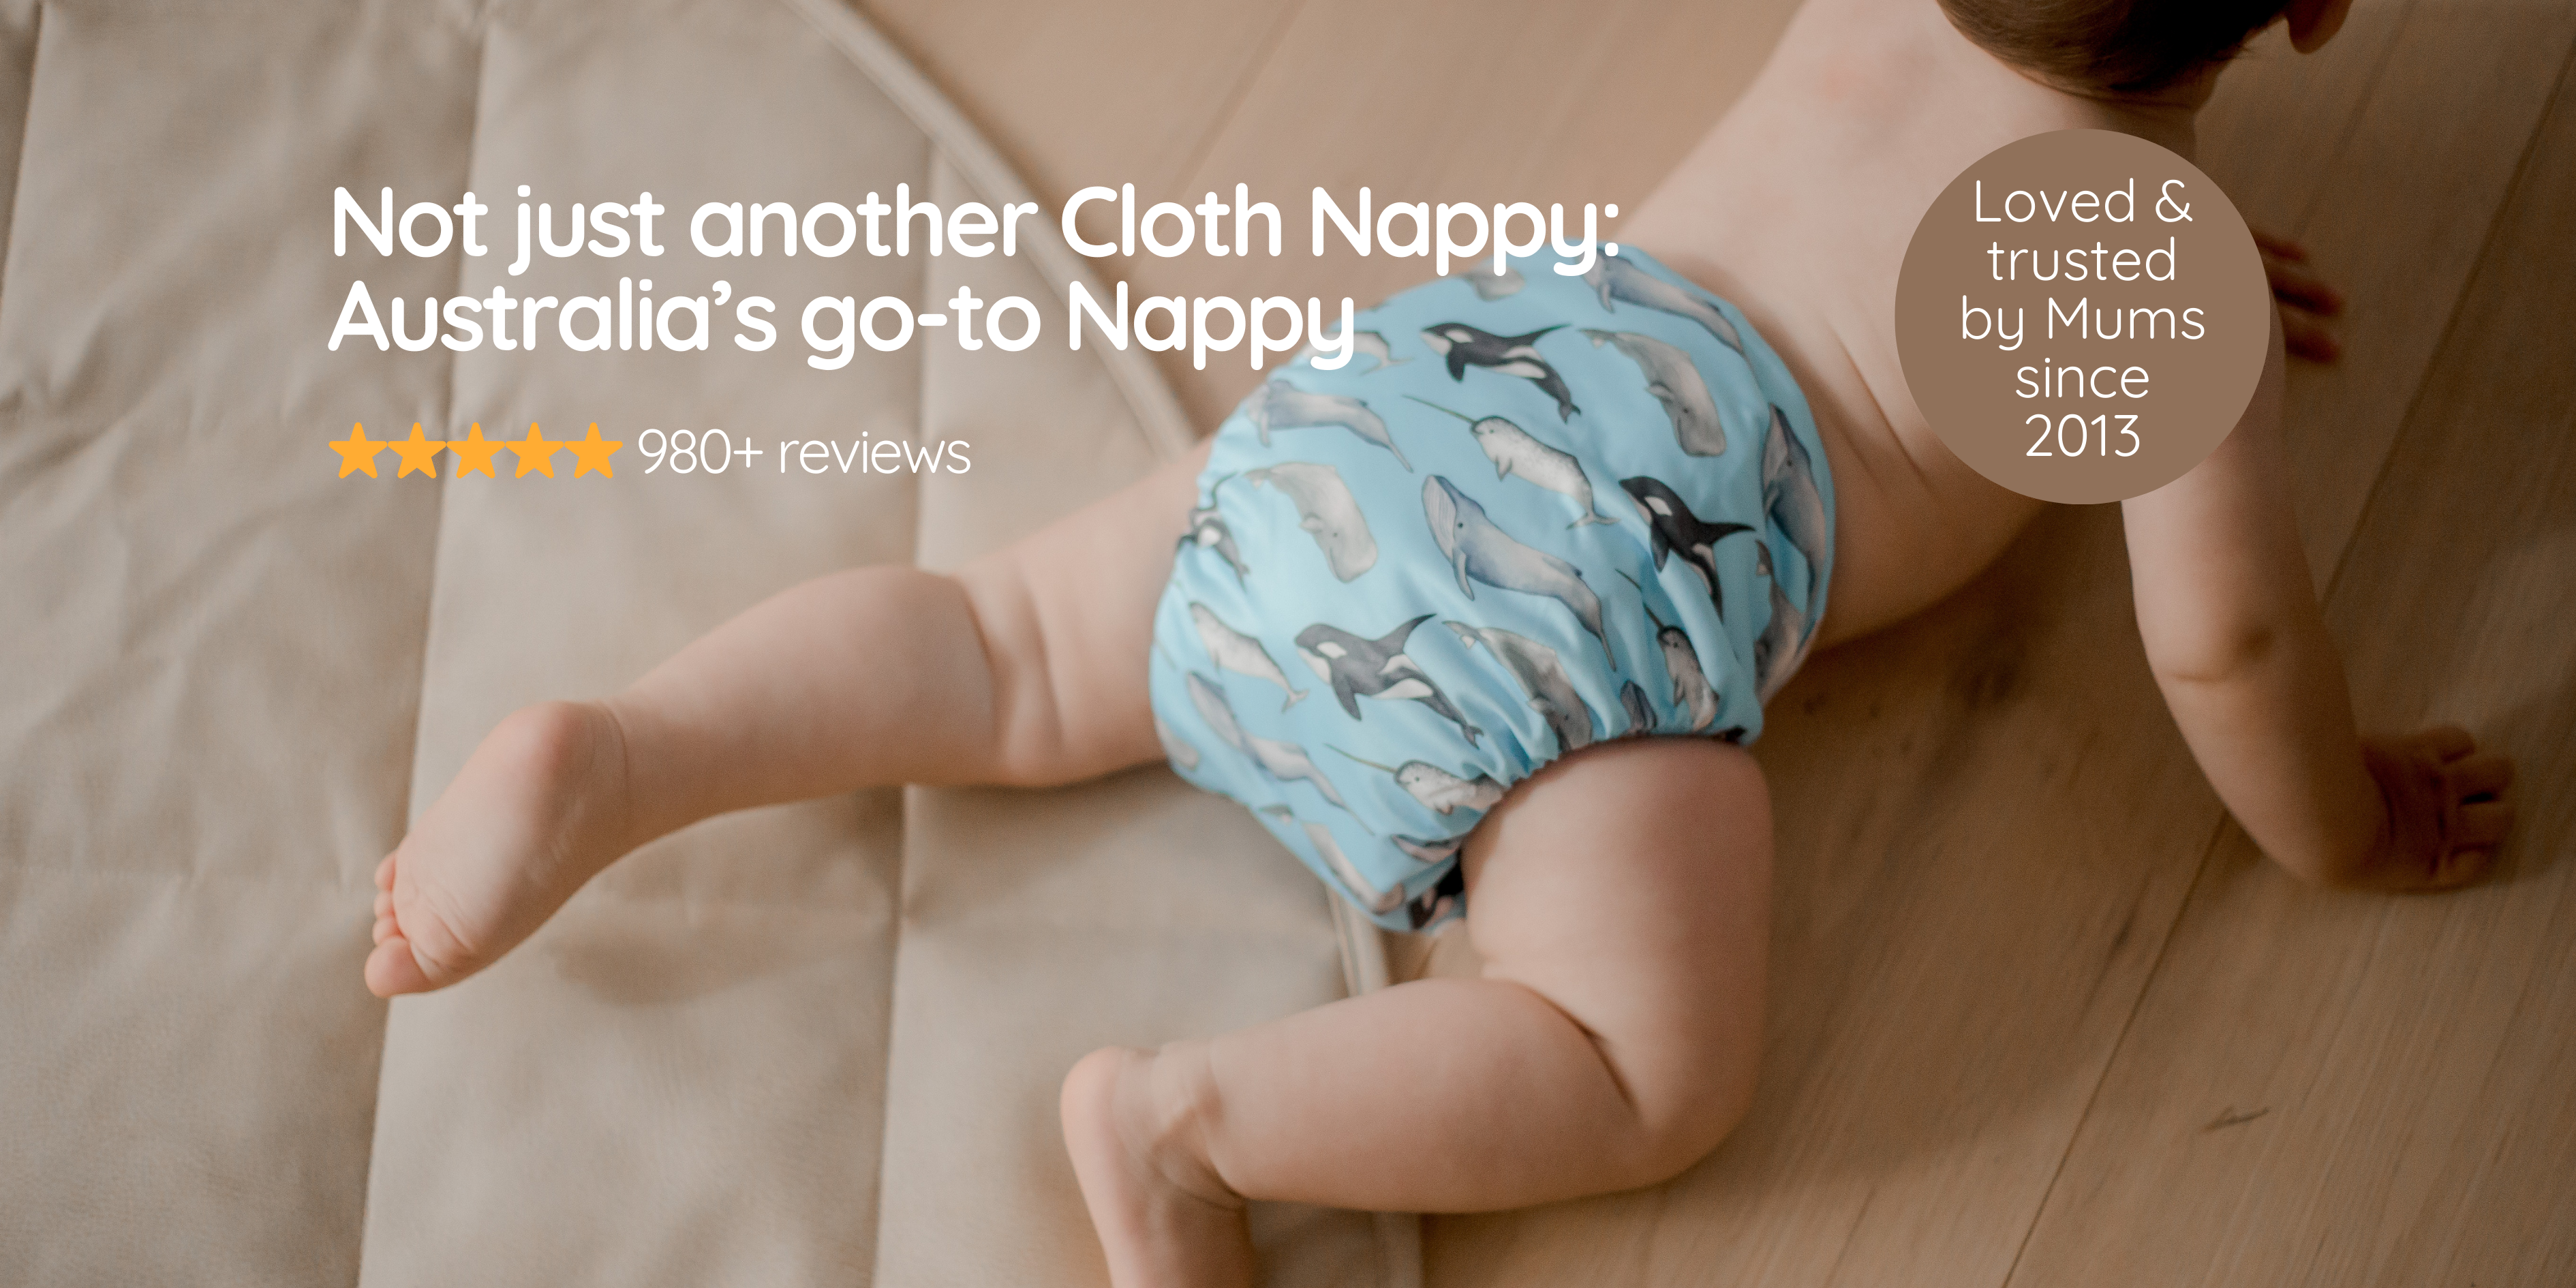 Not just another Cloth Nappy: Image of a baby wearing Australia's go-to Nappy. Loved & trusted by Mums since 2013, with over 980+ reviews.